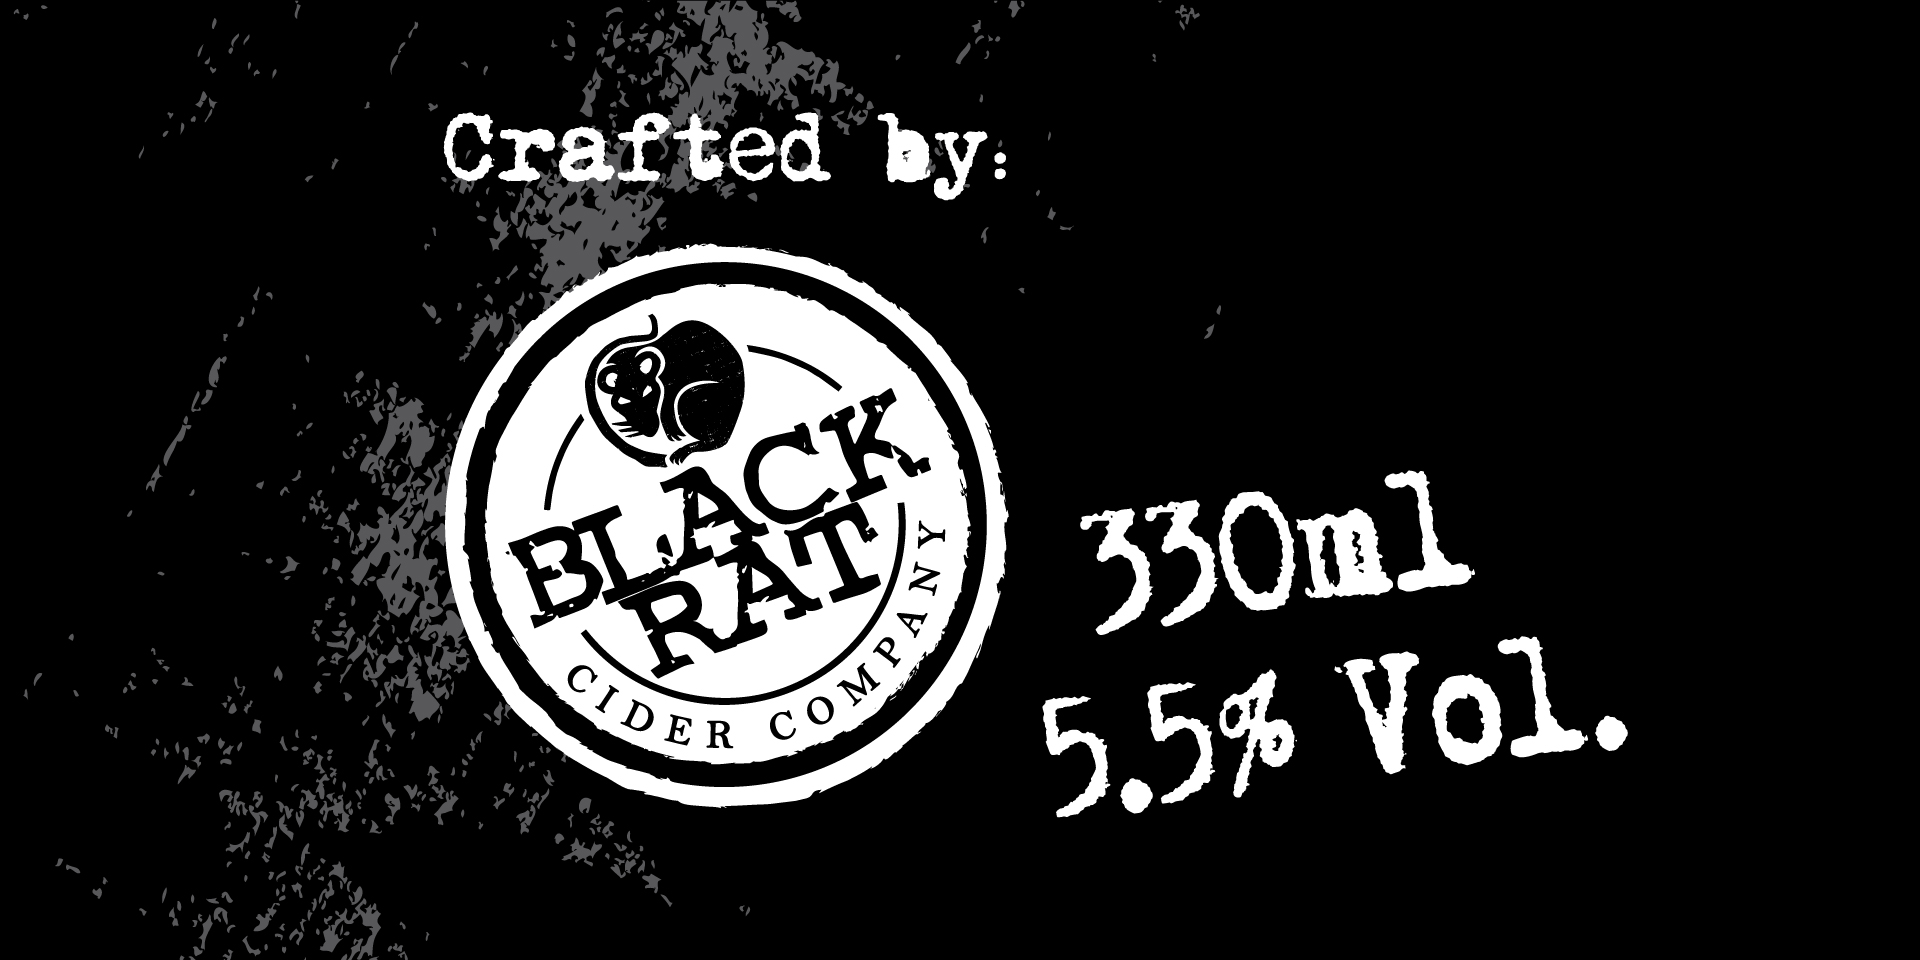 Crafted by Black Rat Cider Company